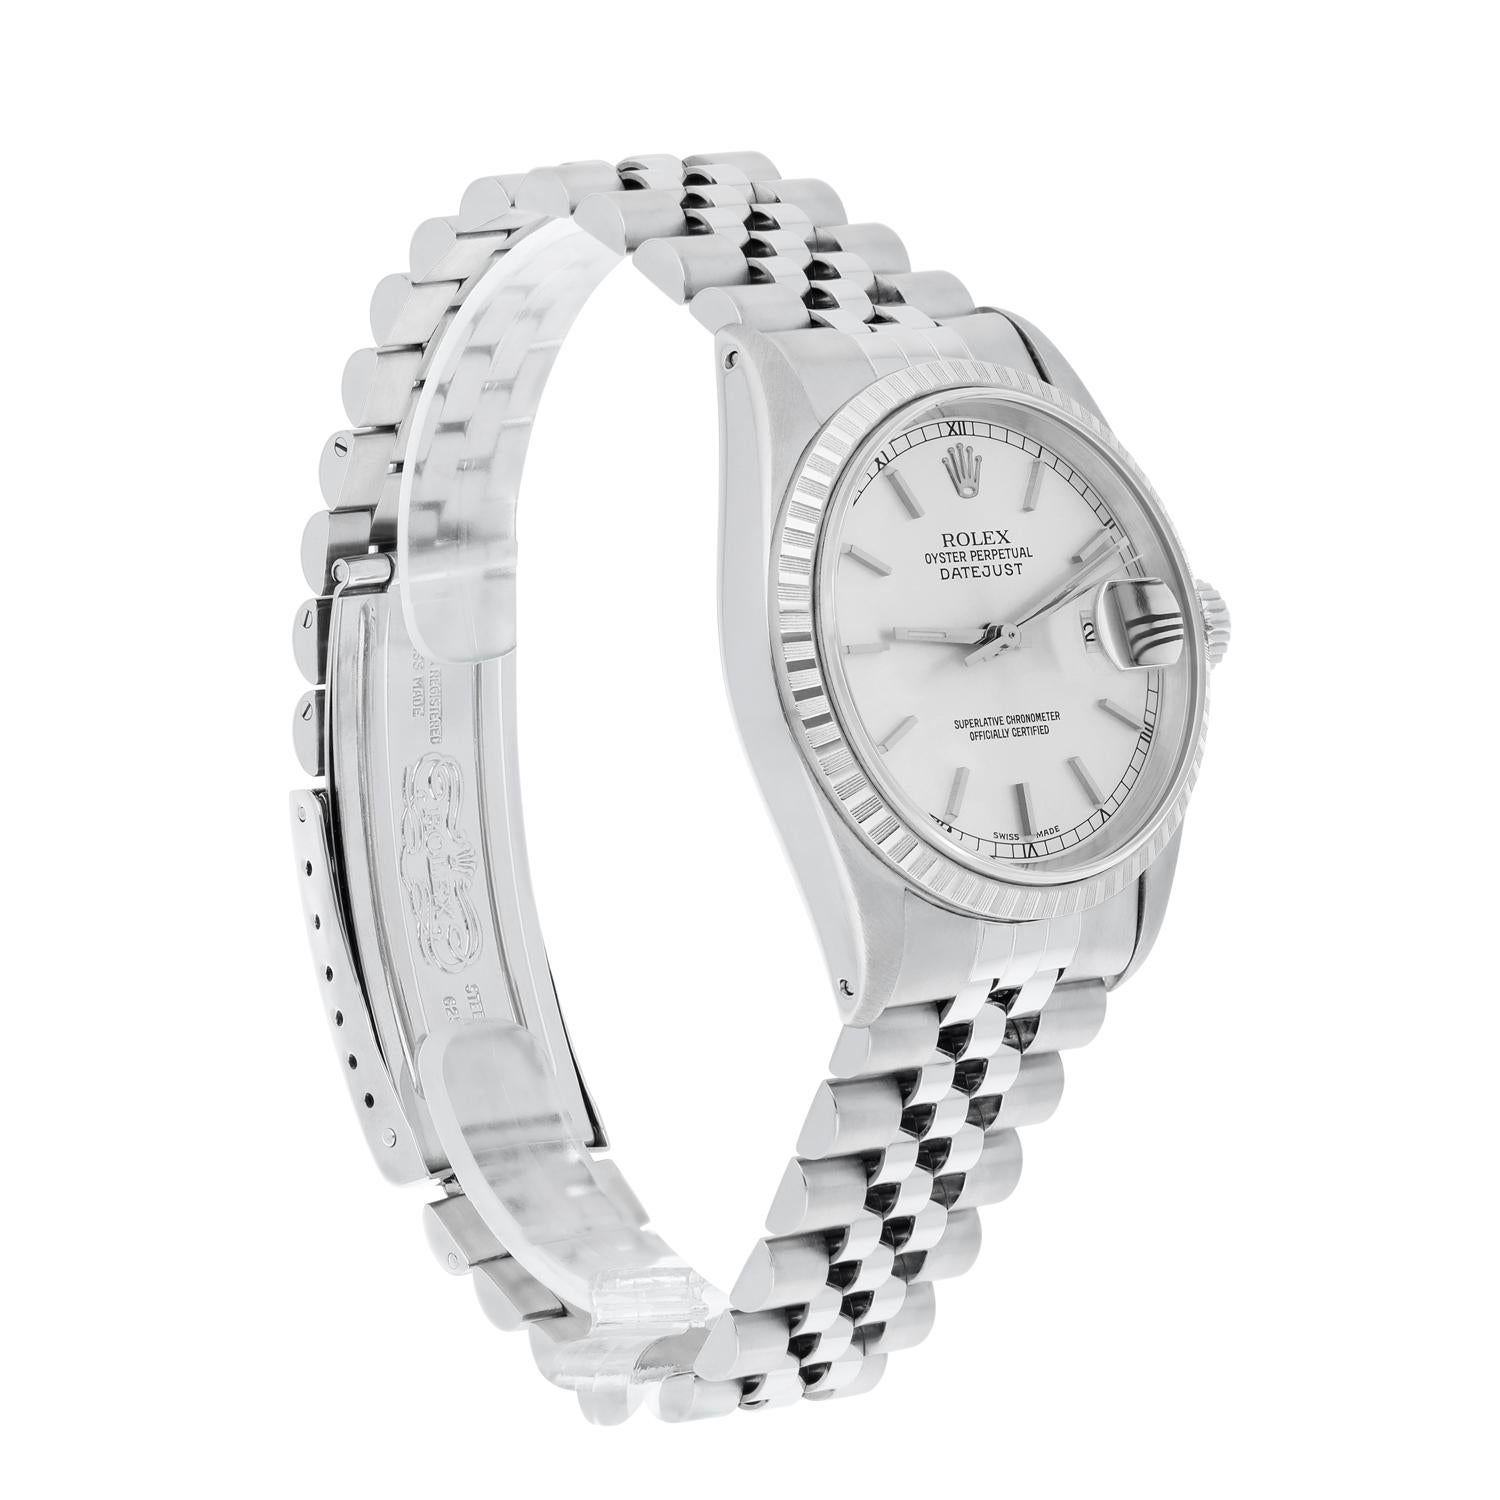 Rolex Datejust 36mm Stainless Steel 16030 Silver RT Index Dial, Circa 1984 For Sale 2